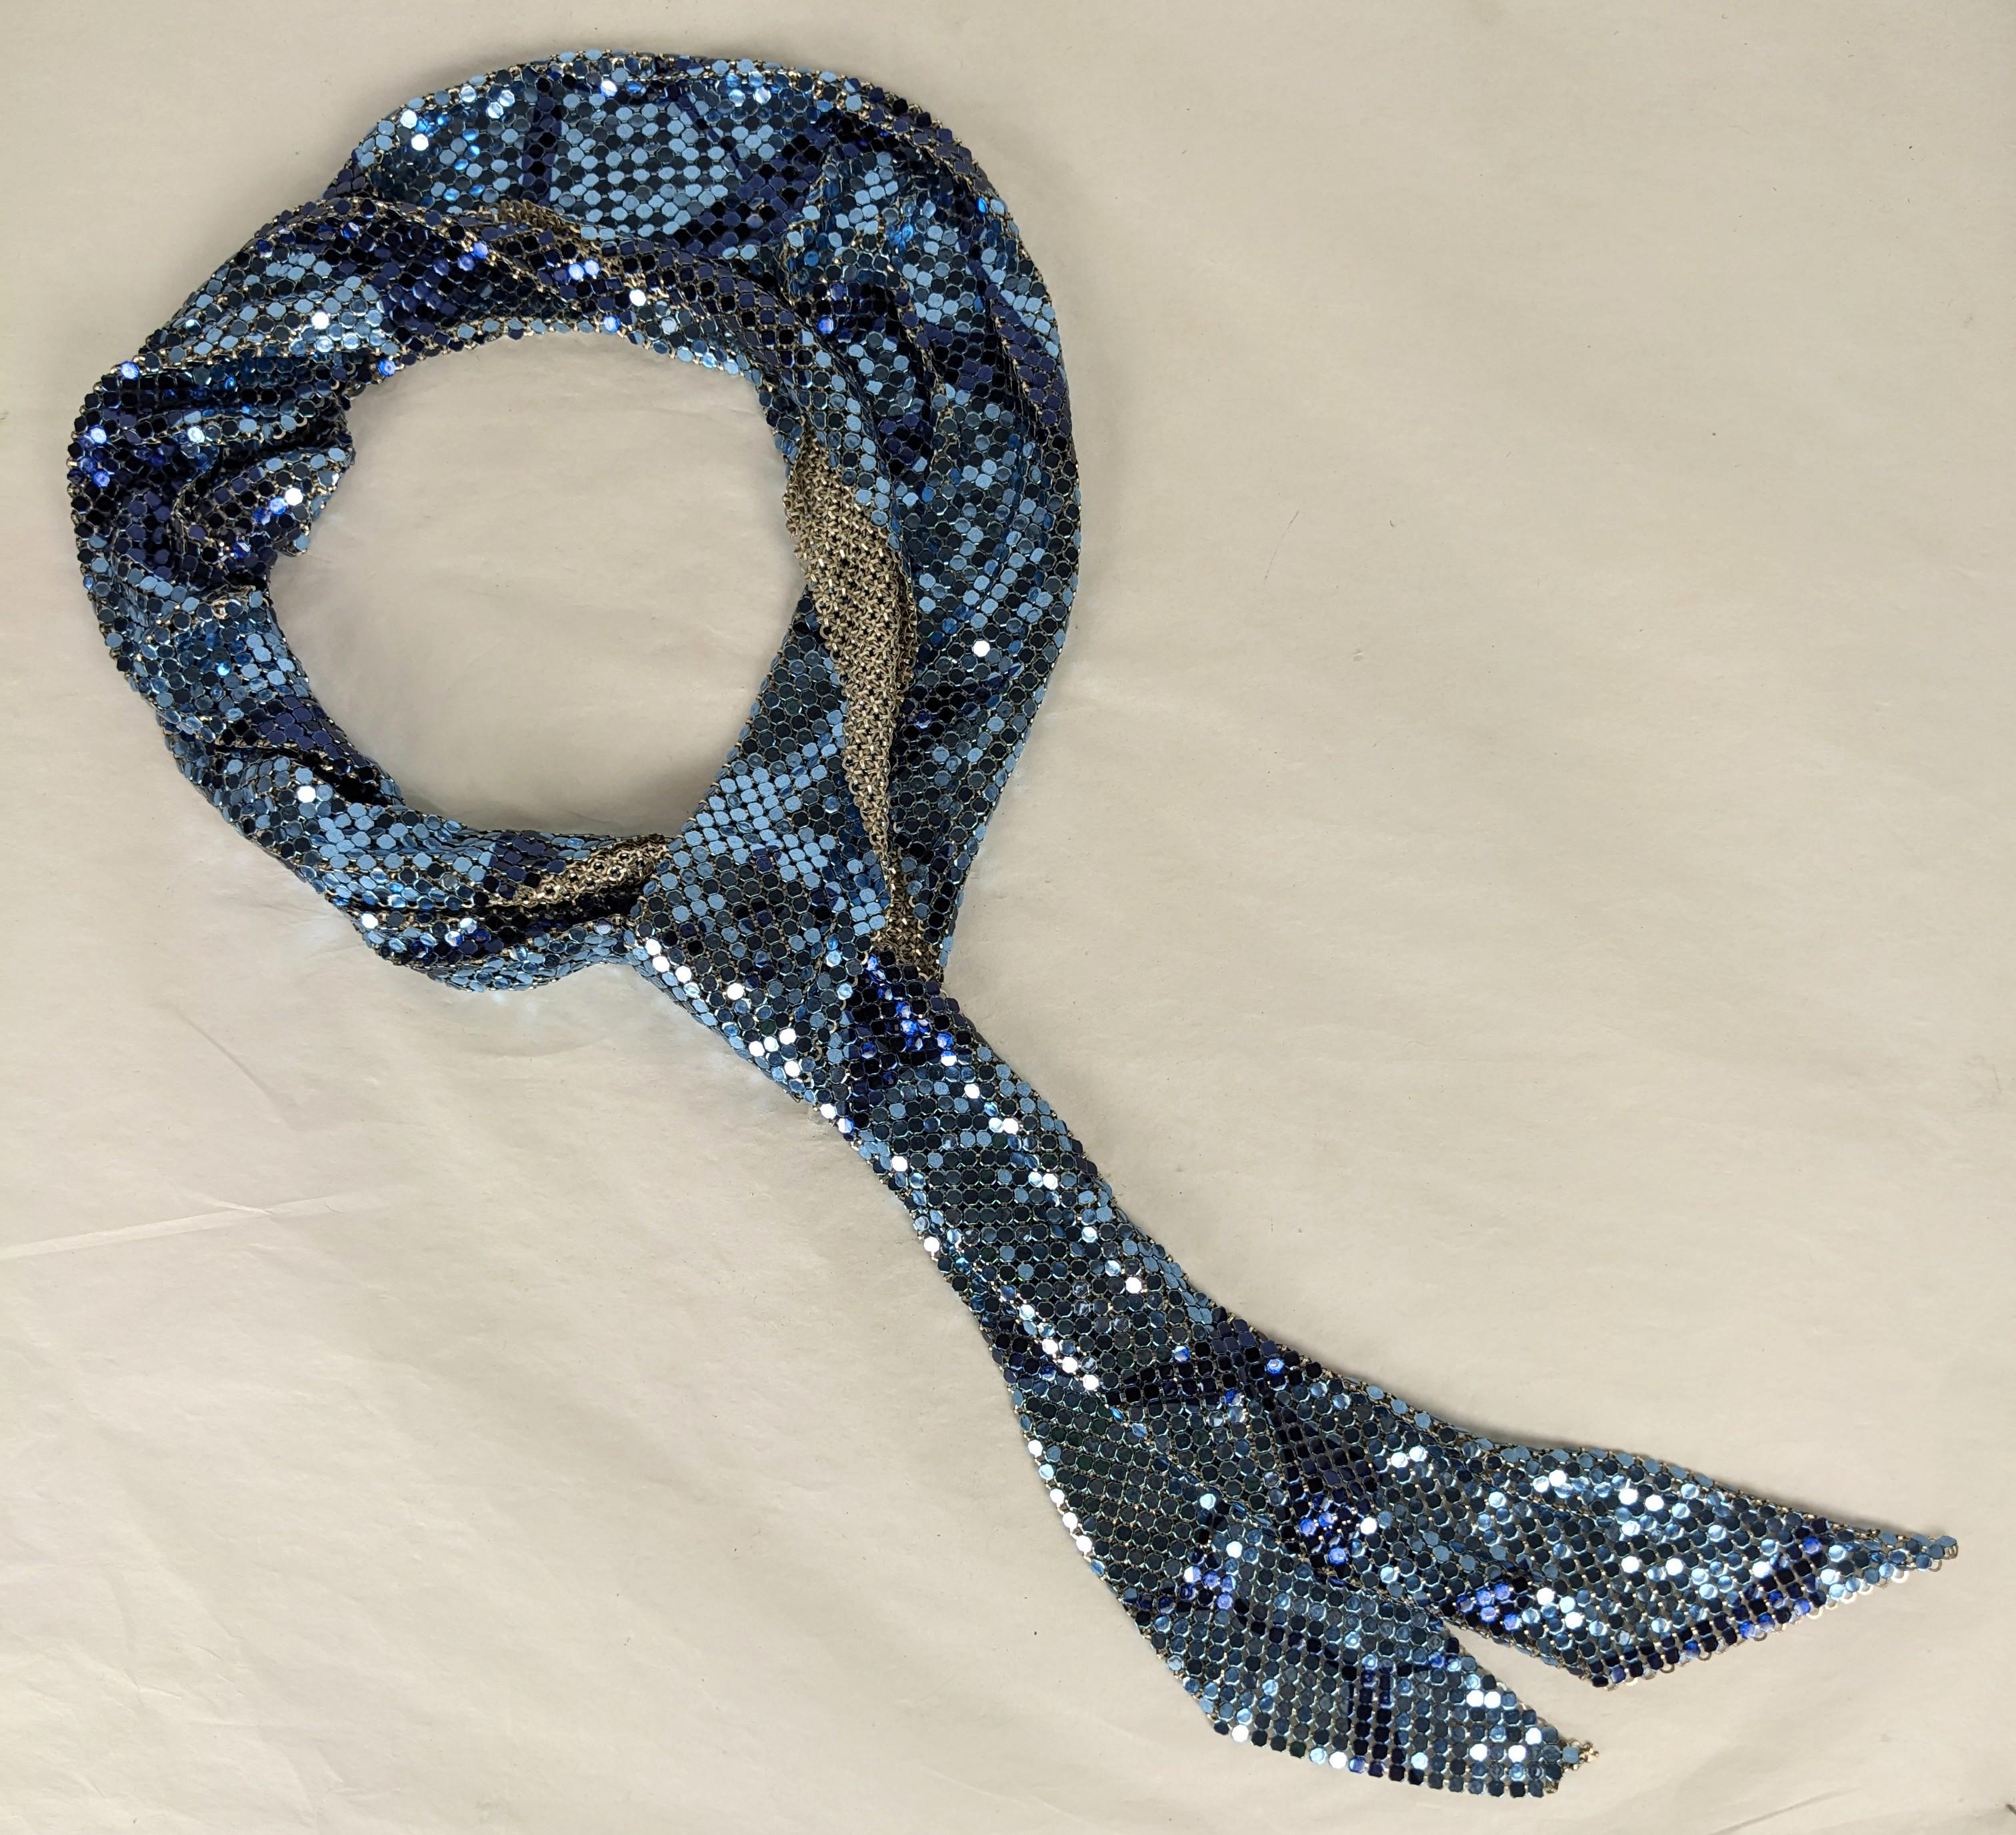 Enamel Metal Mesh Neck Scarf, Whiting Davis In Excellent Condition For Sale In New York, NY